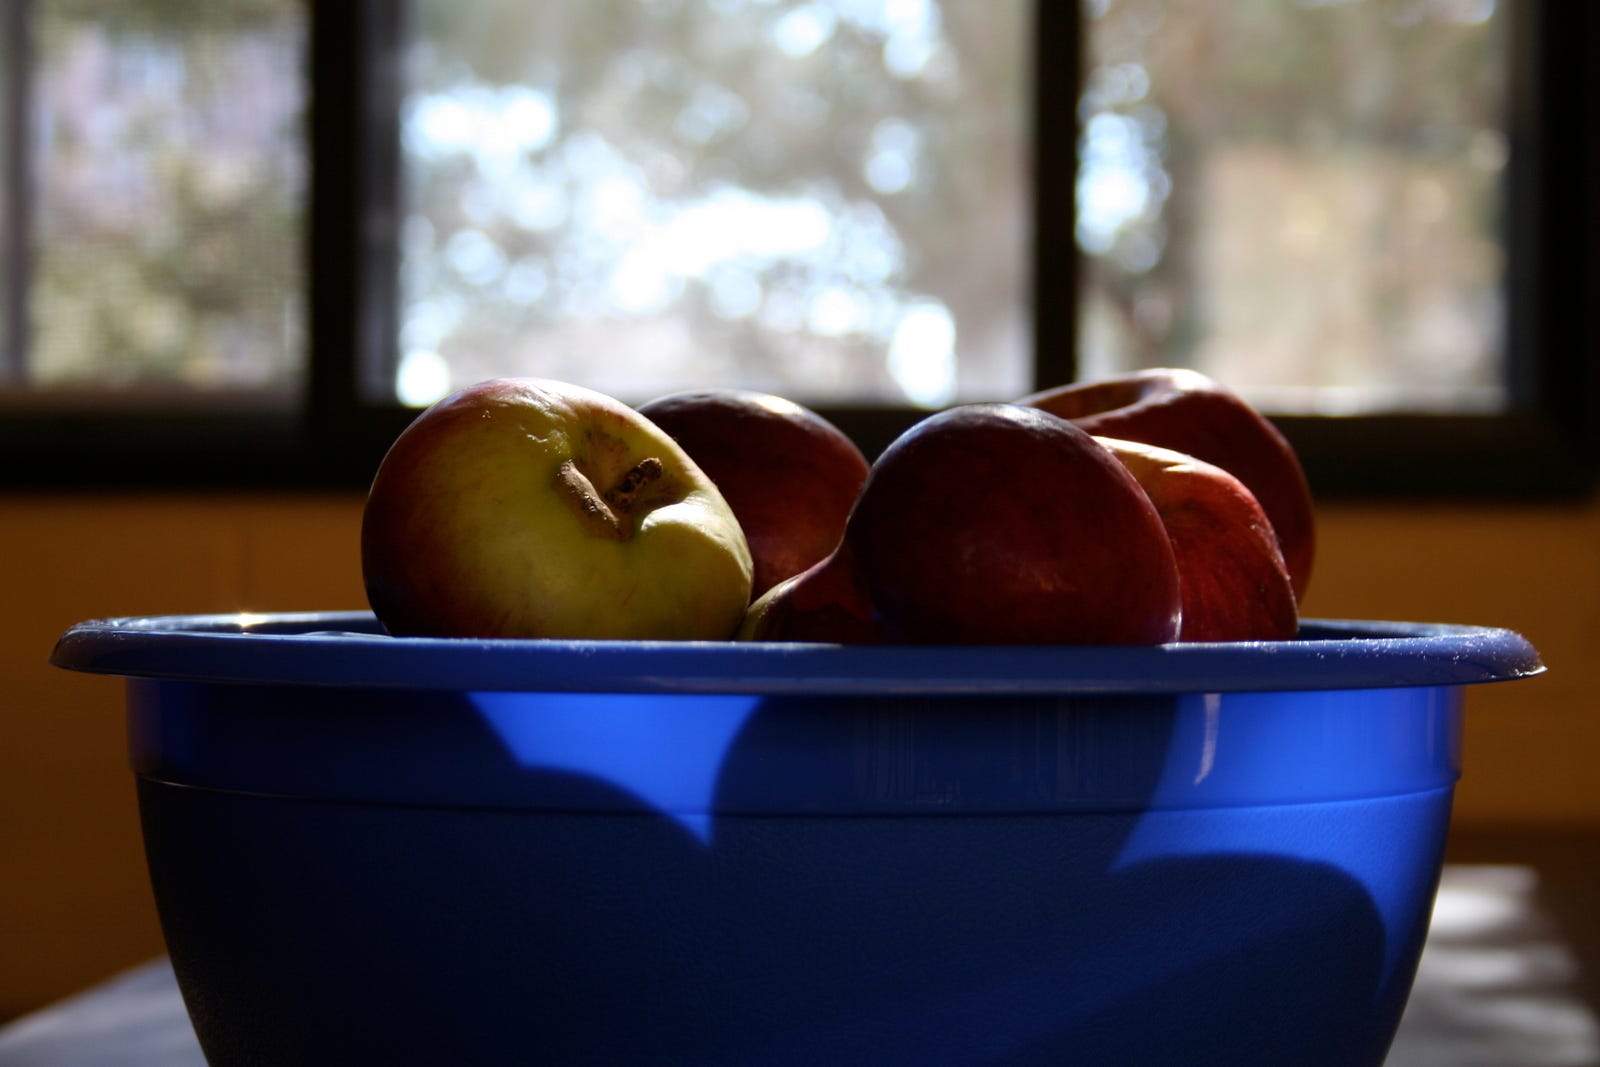 Photo of a bowl of apples in the parish hall of St. James Episcopal Church, New London, CT